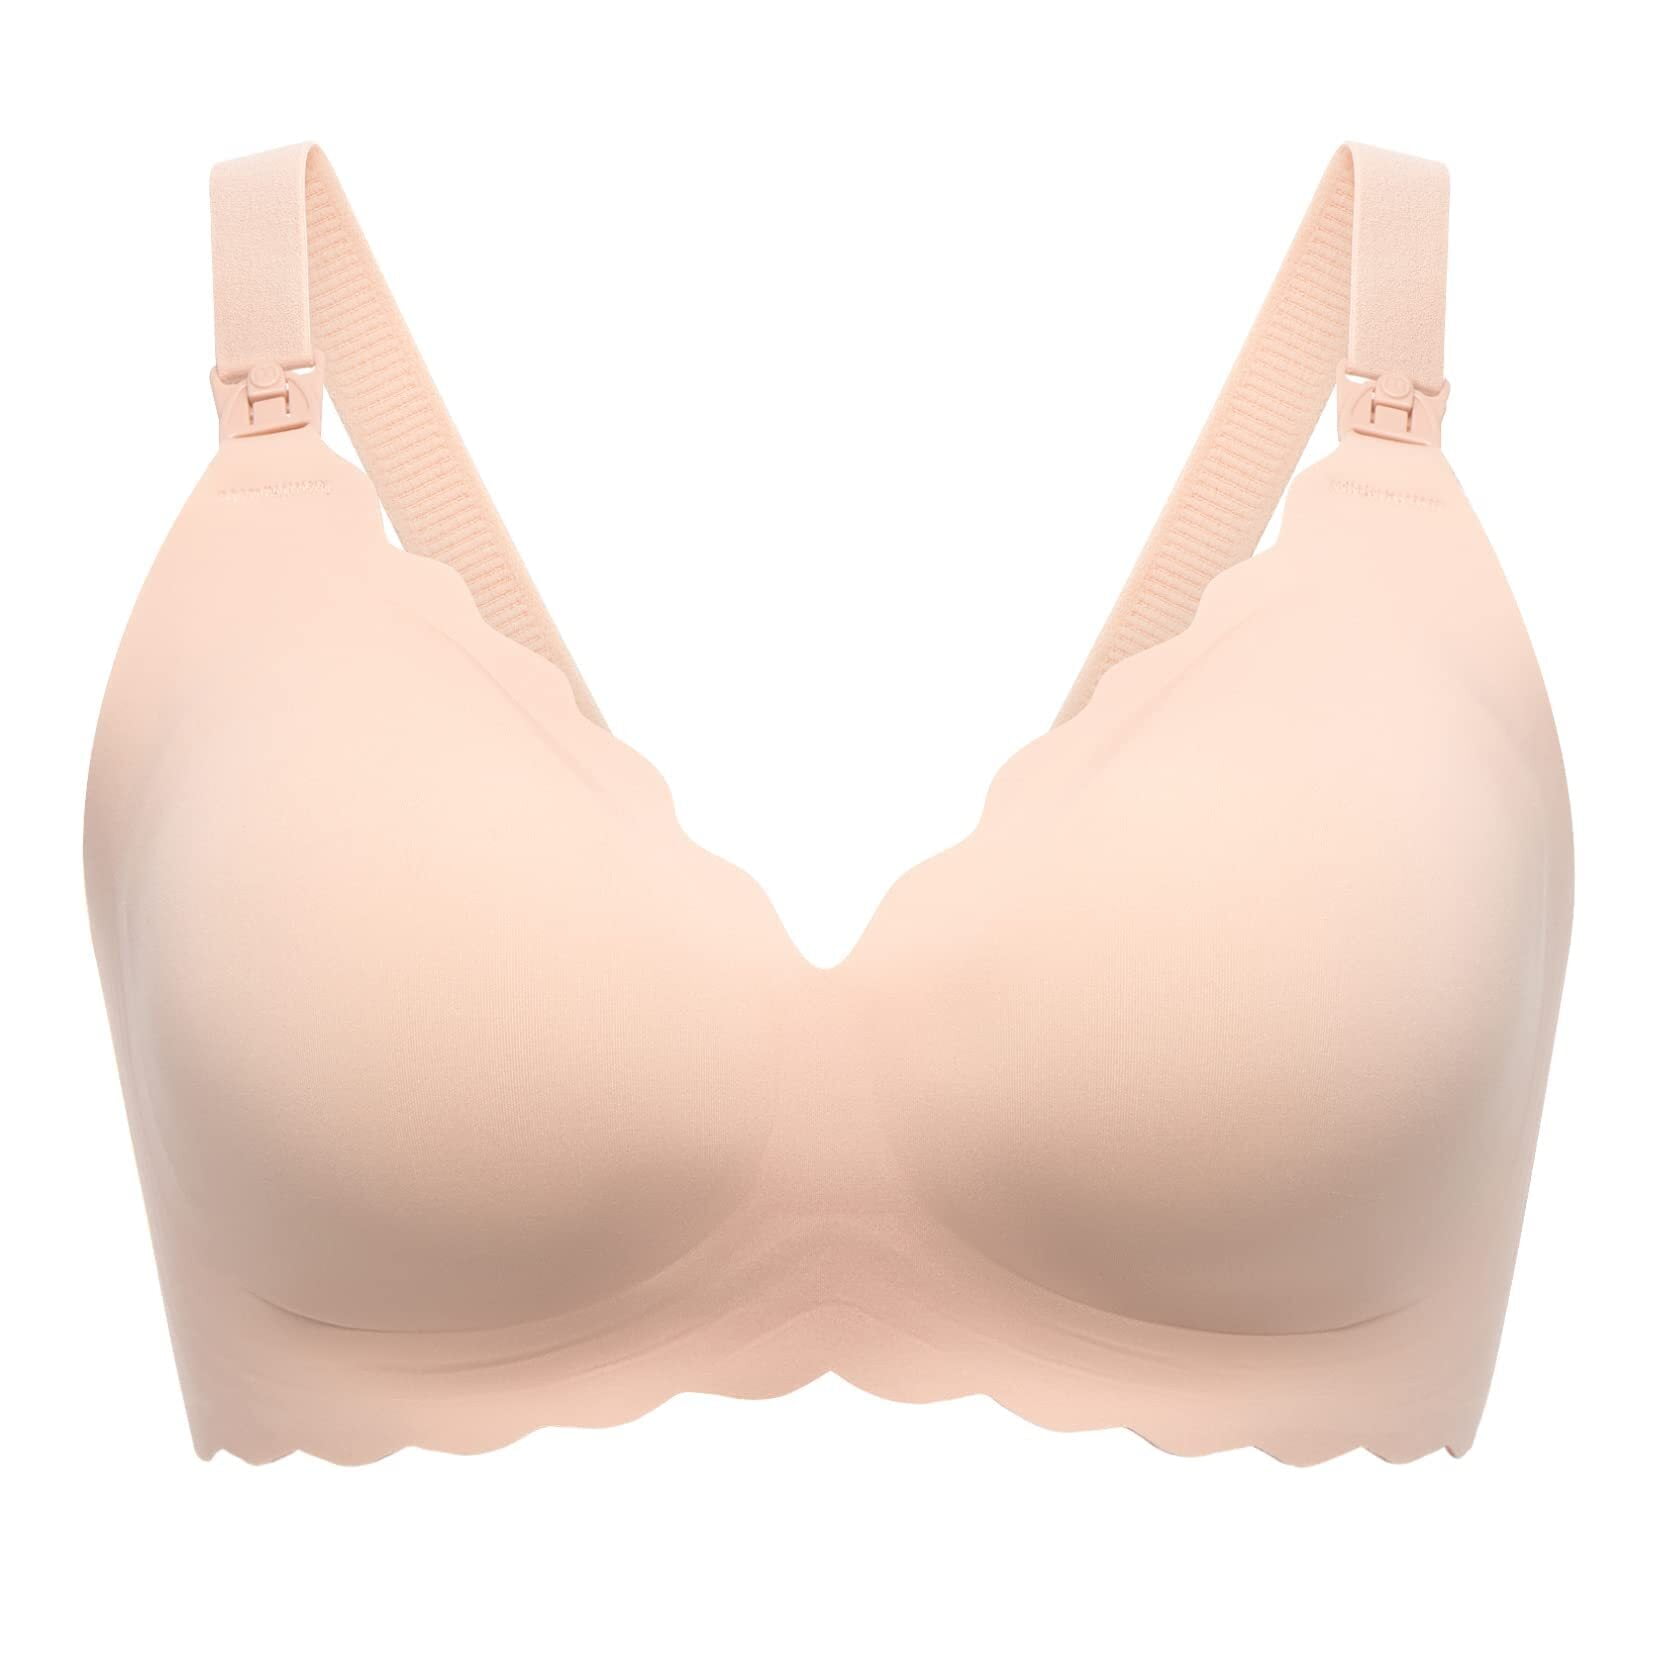 Momcozy Introduces YN46 and FB011 Bras as All-Purpose